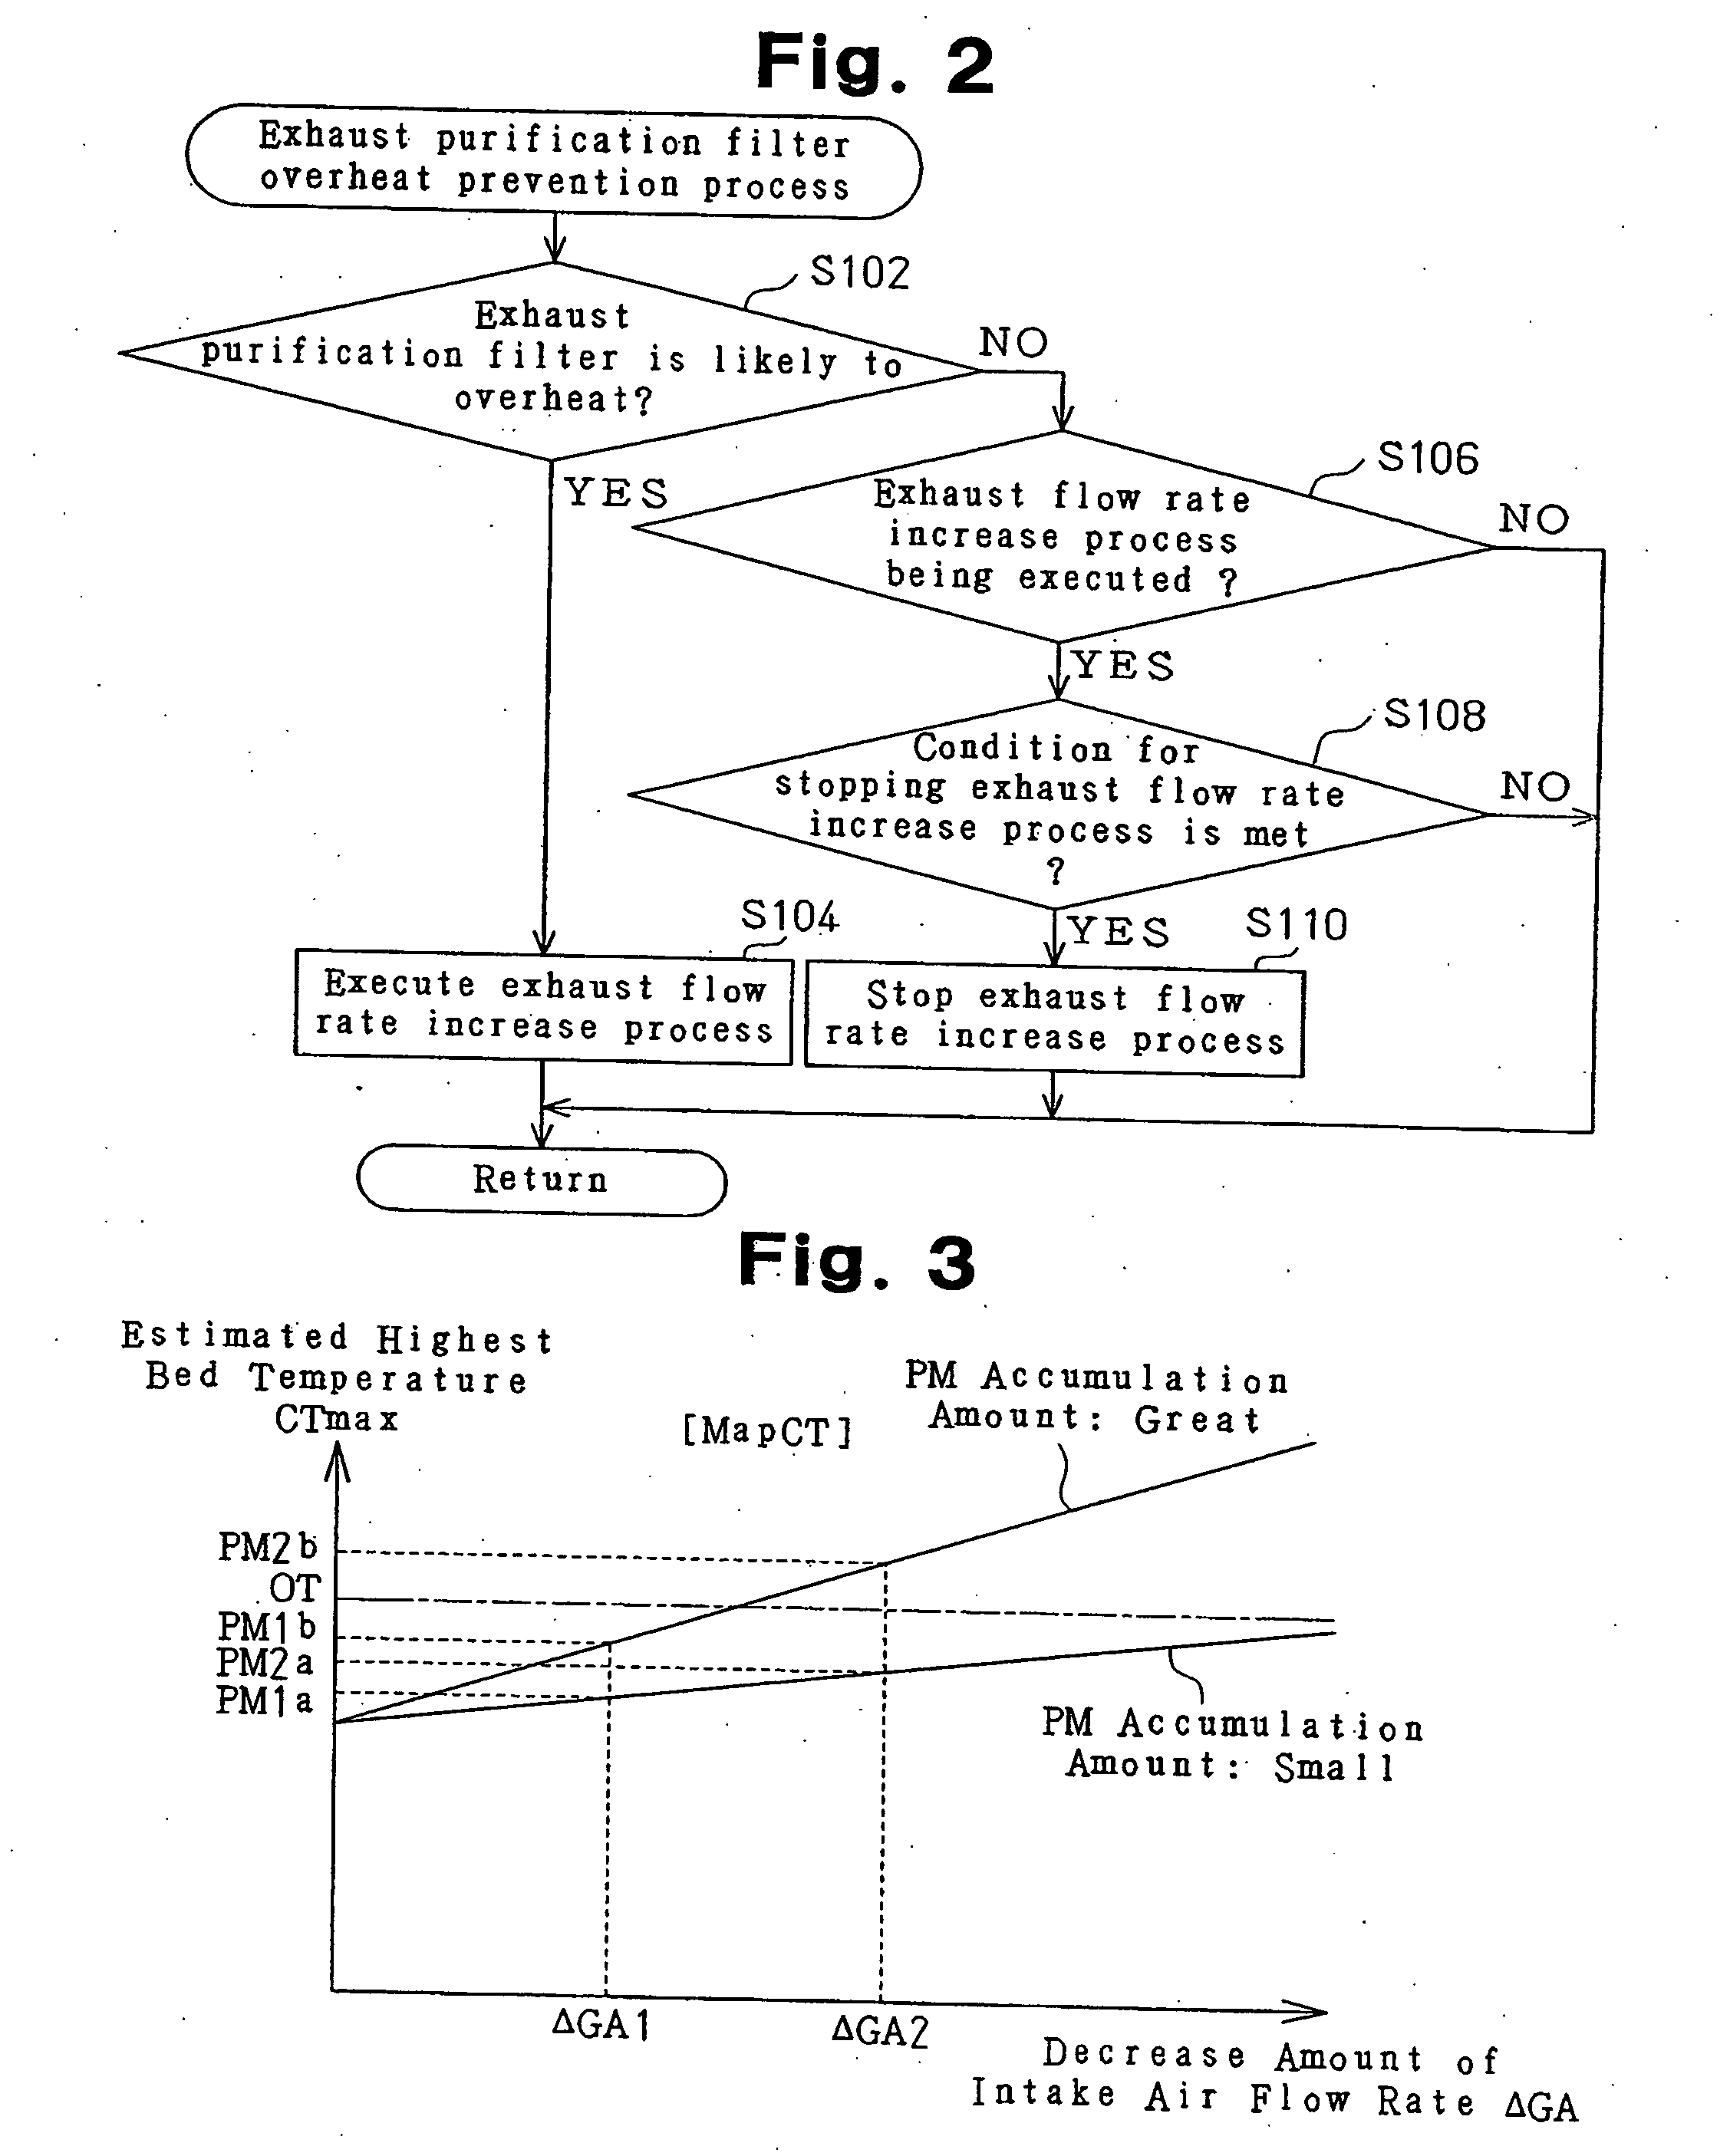 Apparatus and method for preventing overheating of exhaust purification filter